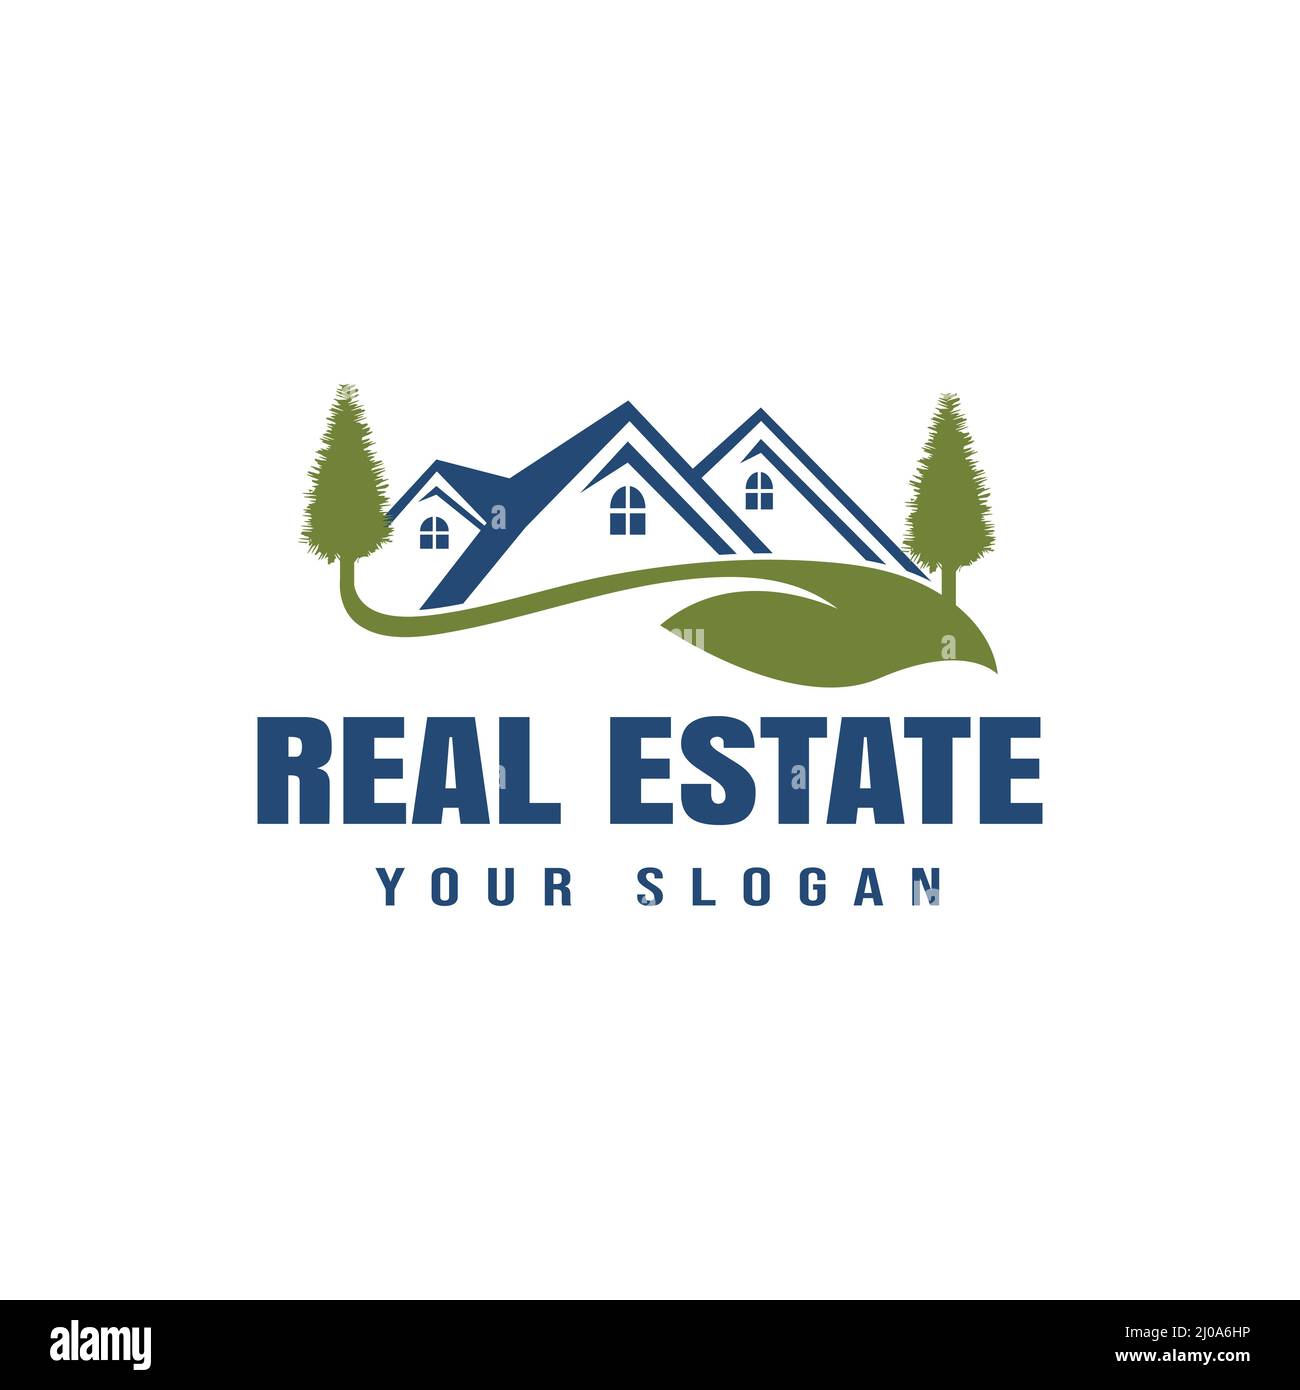 Pine tree house design logo, vector illustration of a pine tree that blends with the image of a house, real estate Stock Vector